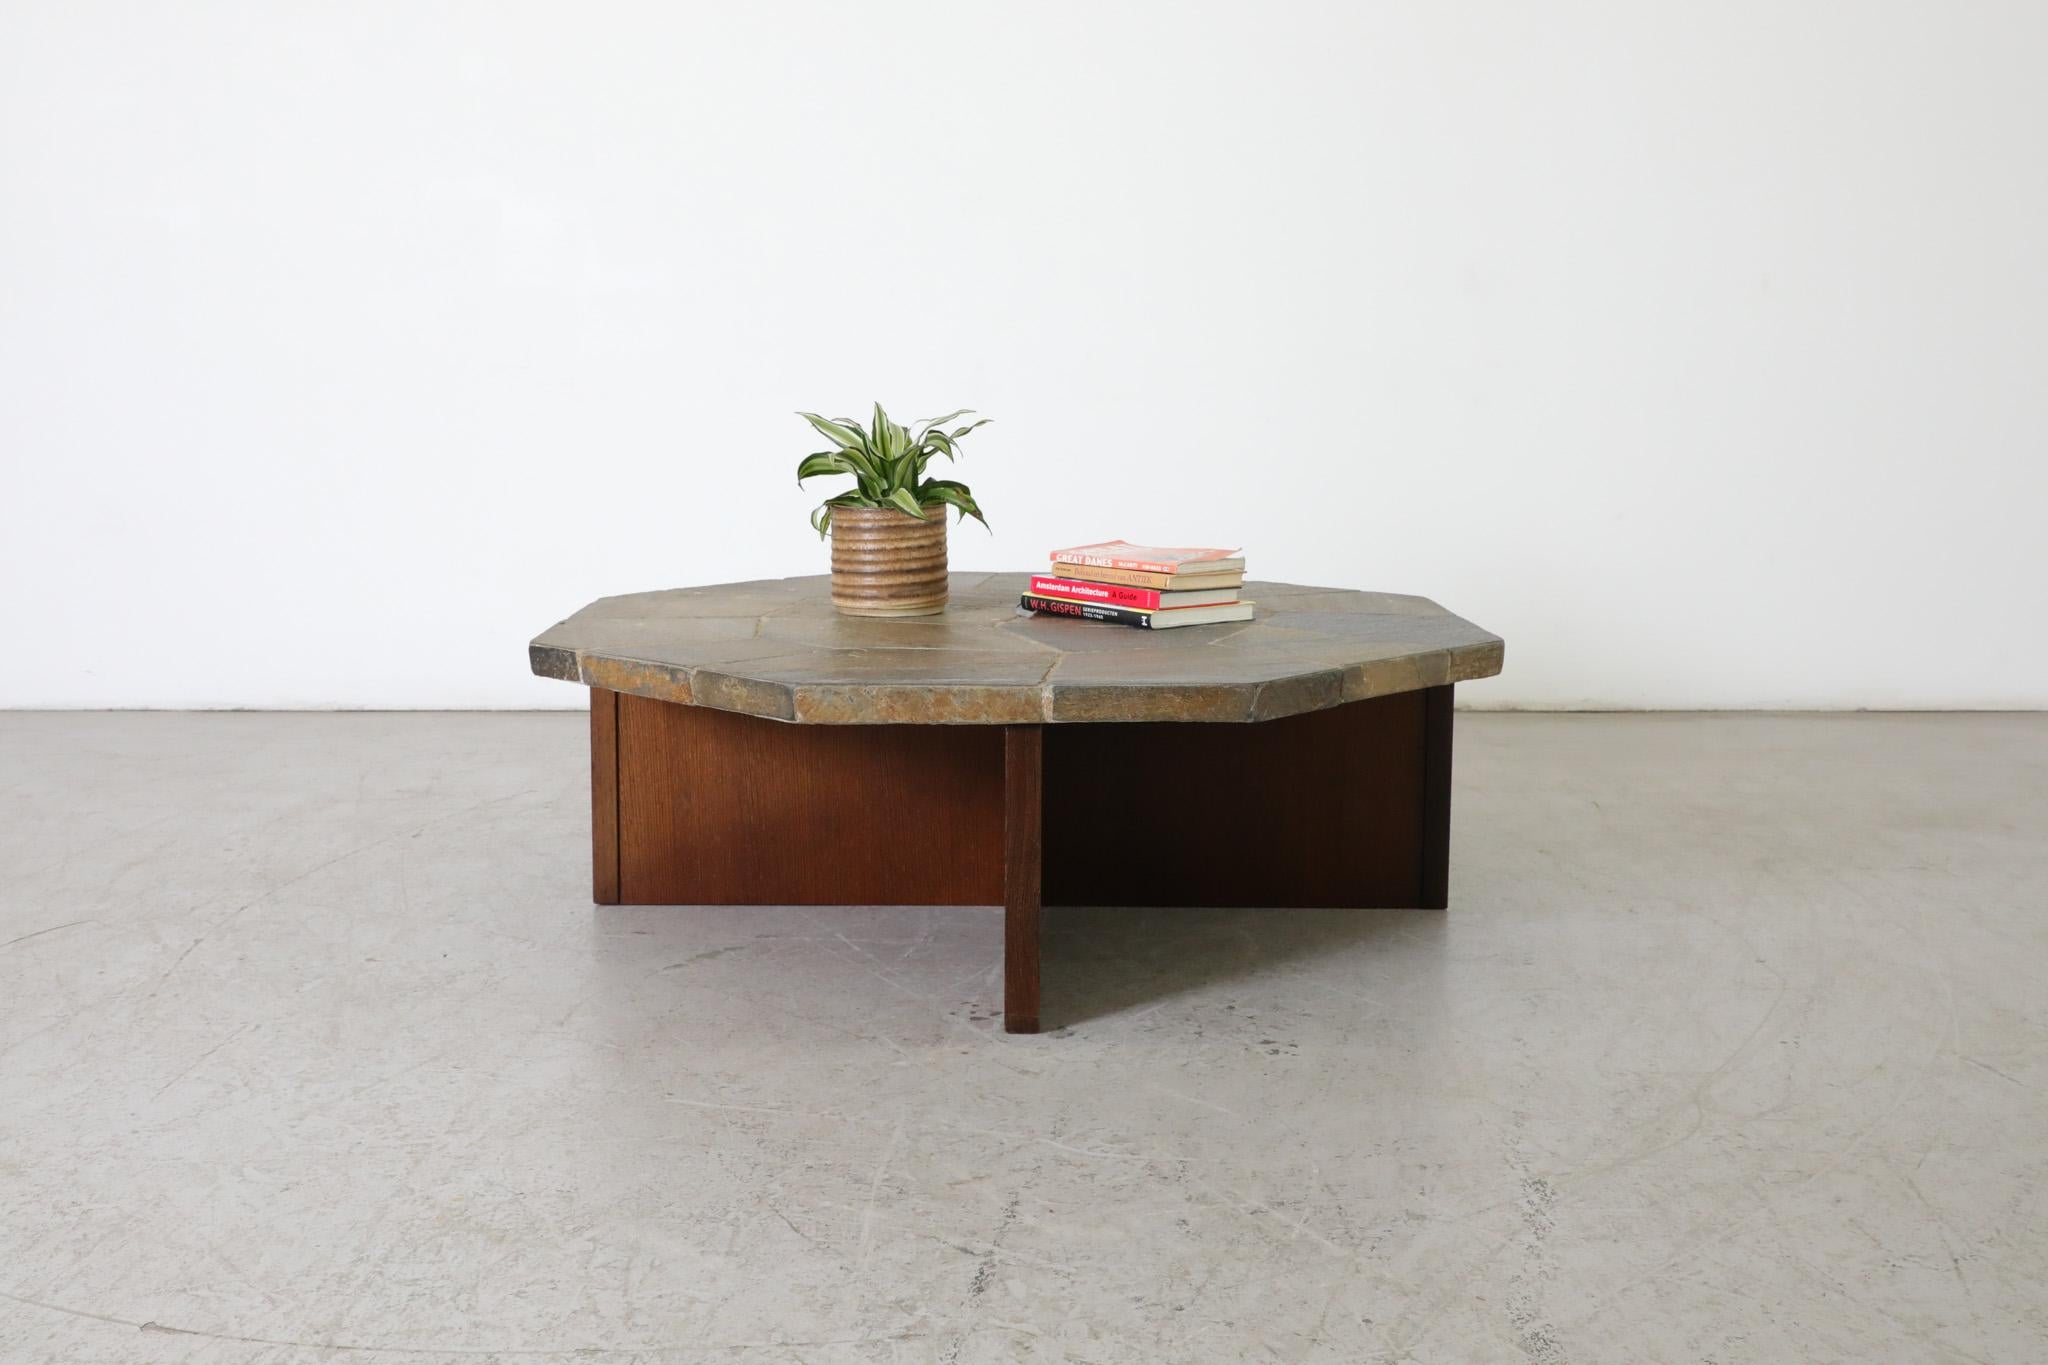 Brutalist coffee table with heavy mosaic stone top on teak wood 'X' shaped base. A large stone slab decorated with inlaid cut stones on a beautiful detailed teak base. In original condition with some wear consistent with age and use.